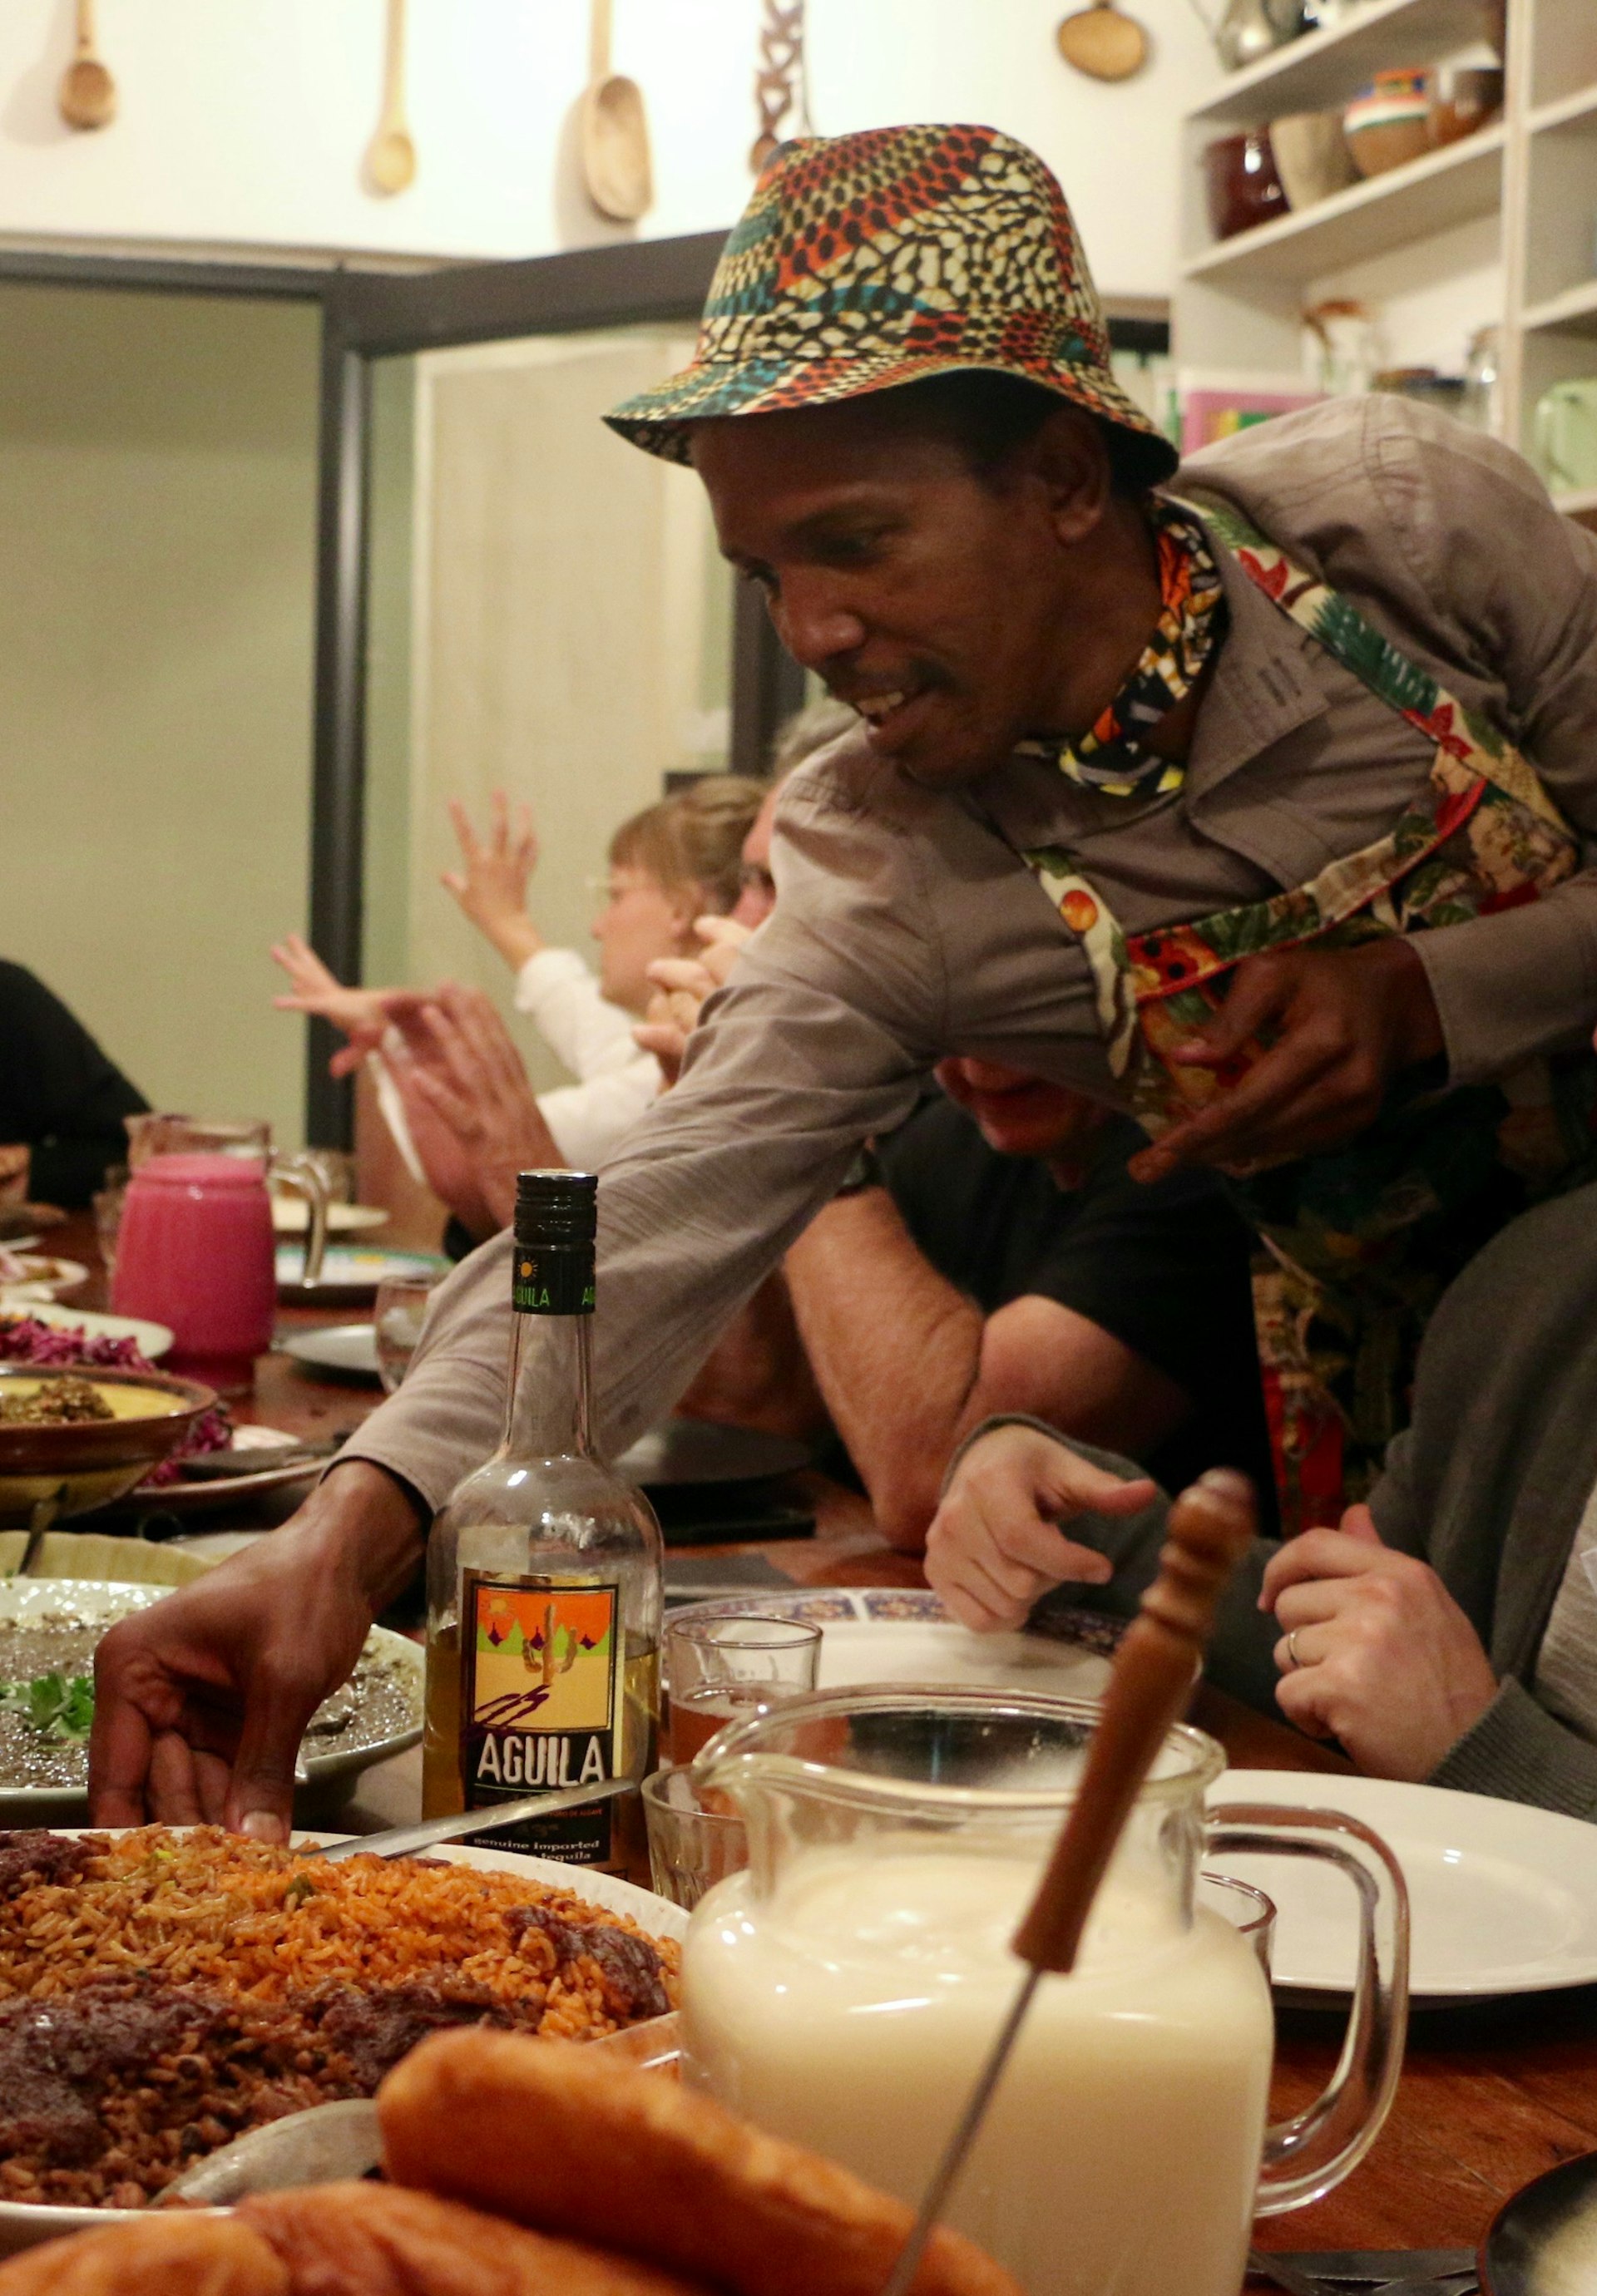 Donning a flamboyant hat and matching apron and scarf, Sanza Sandile places a rich-looking rice dish on the table for his guests at his Yeoville Dinning Club.© Simon Richmond / Lonely Planet